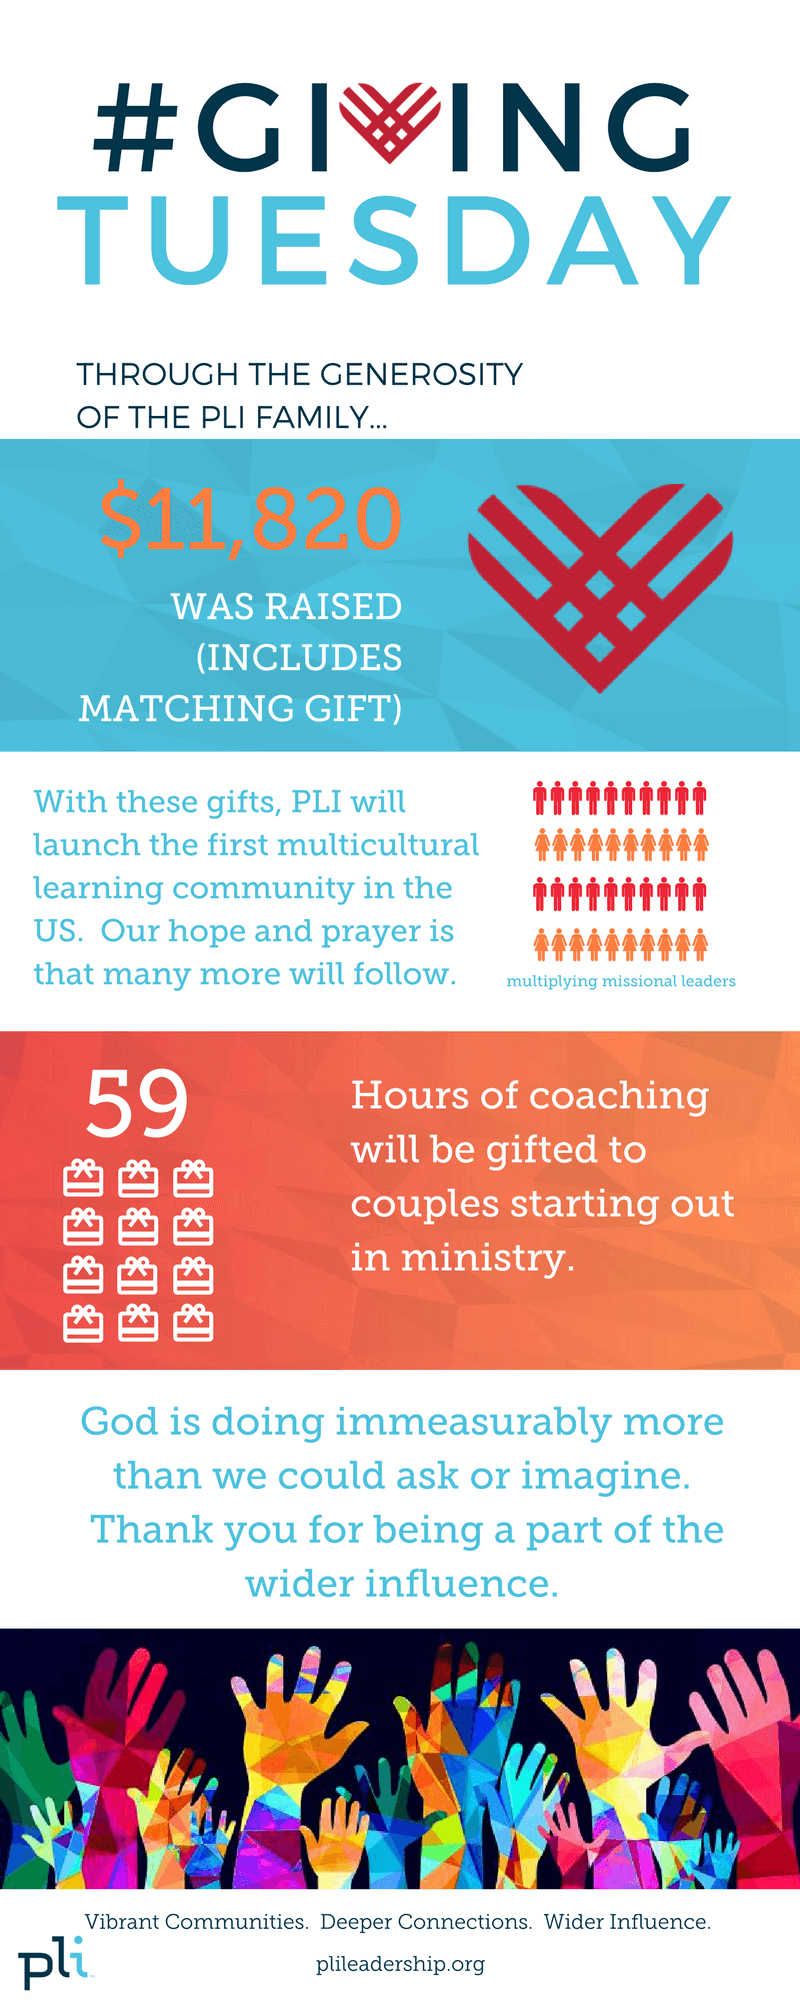 givingtuesday-infographic-1